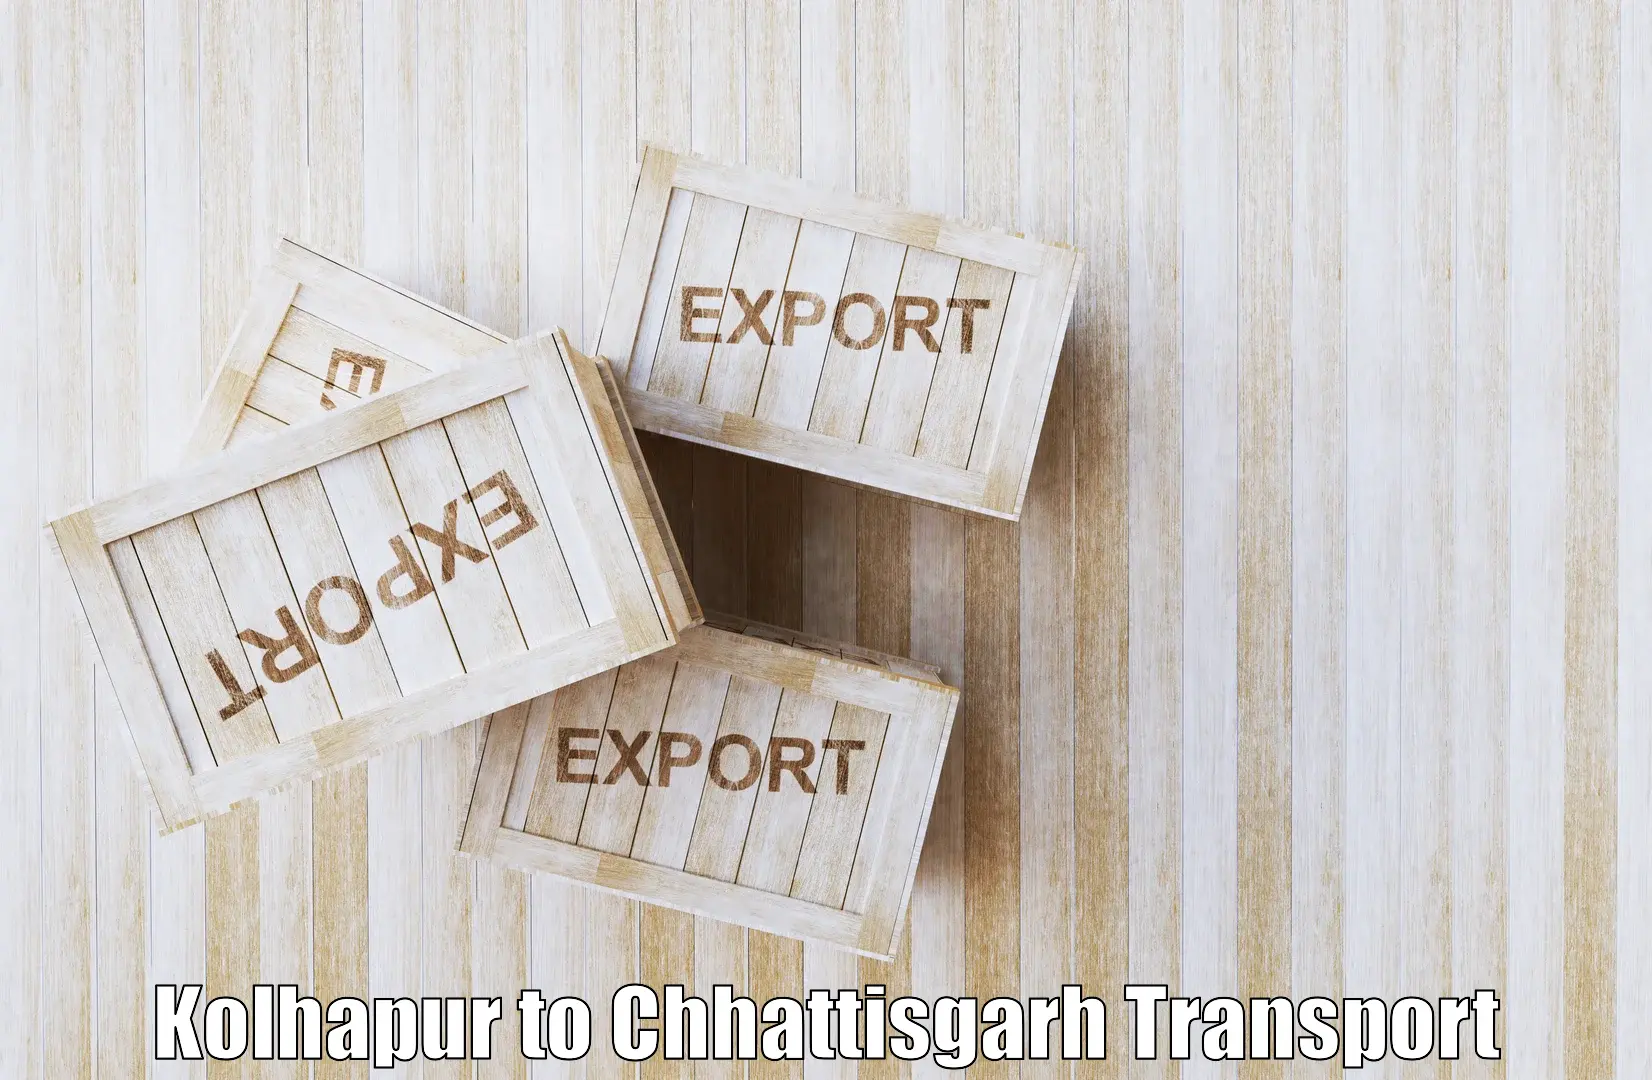 Container transport service in Kolhapur to Dongargarh